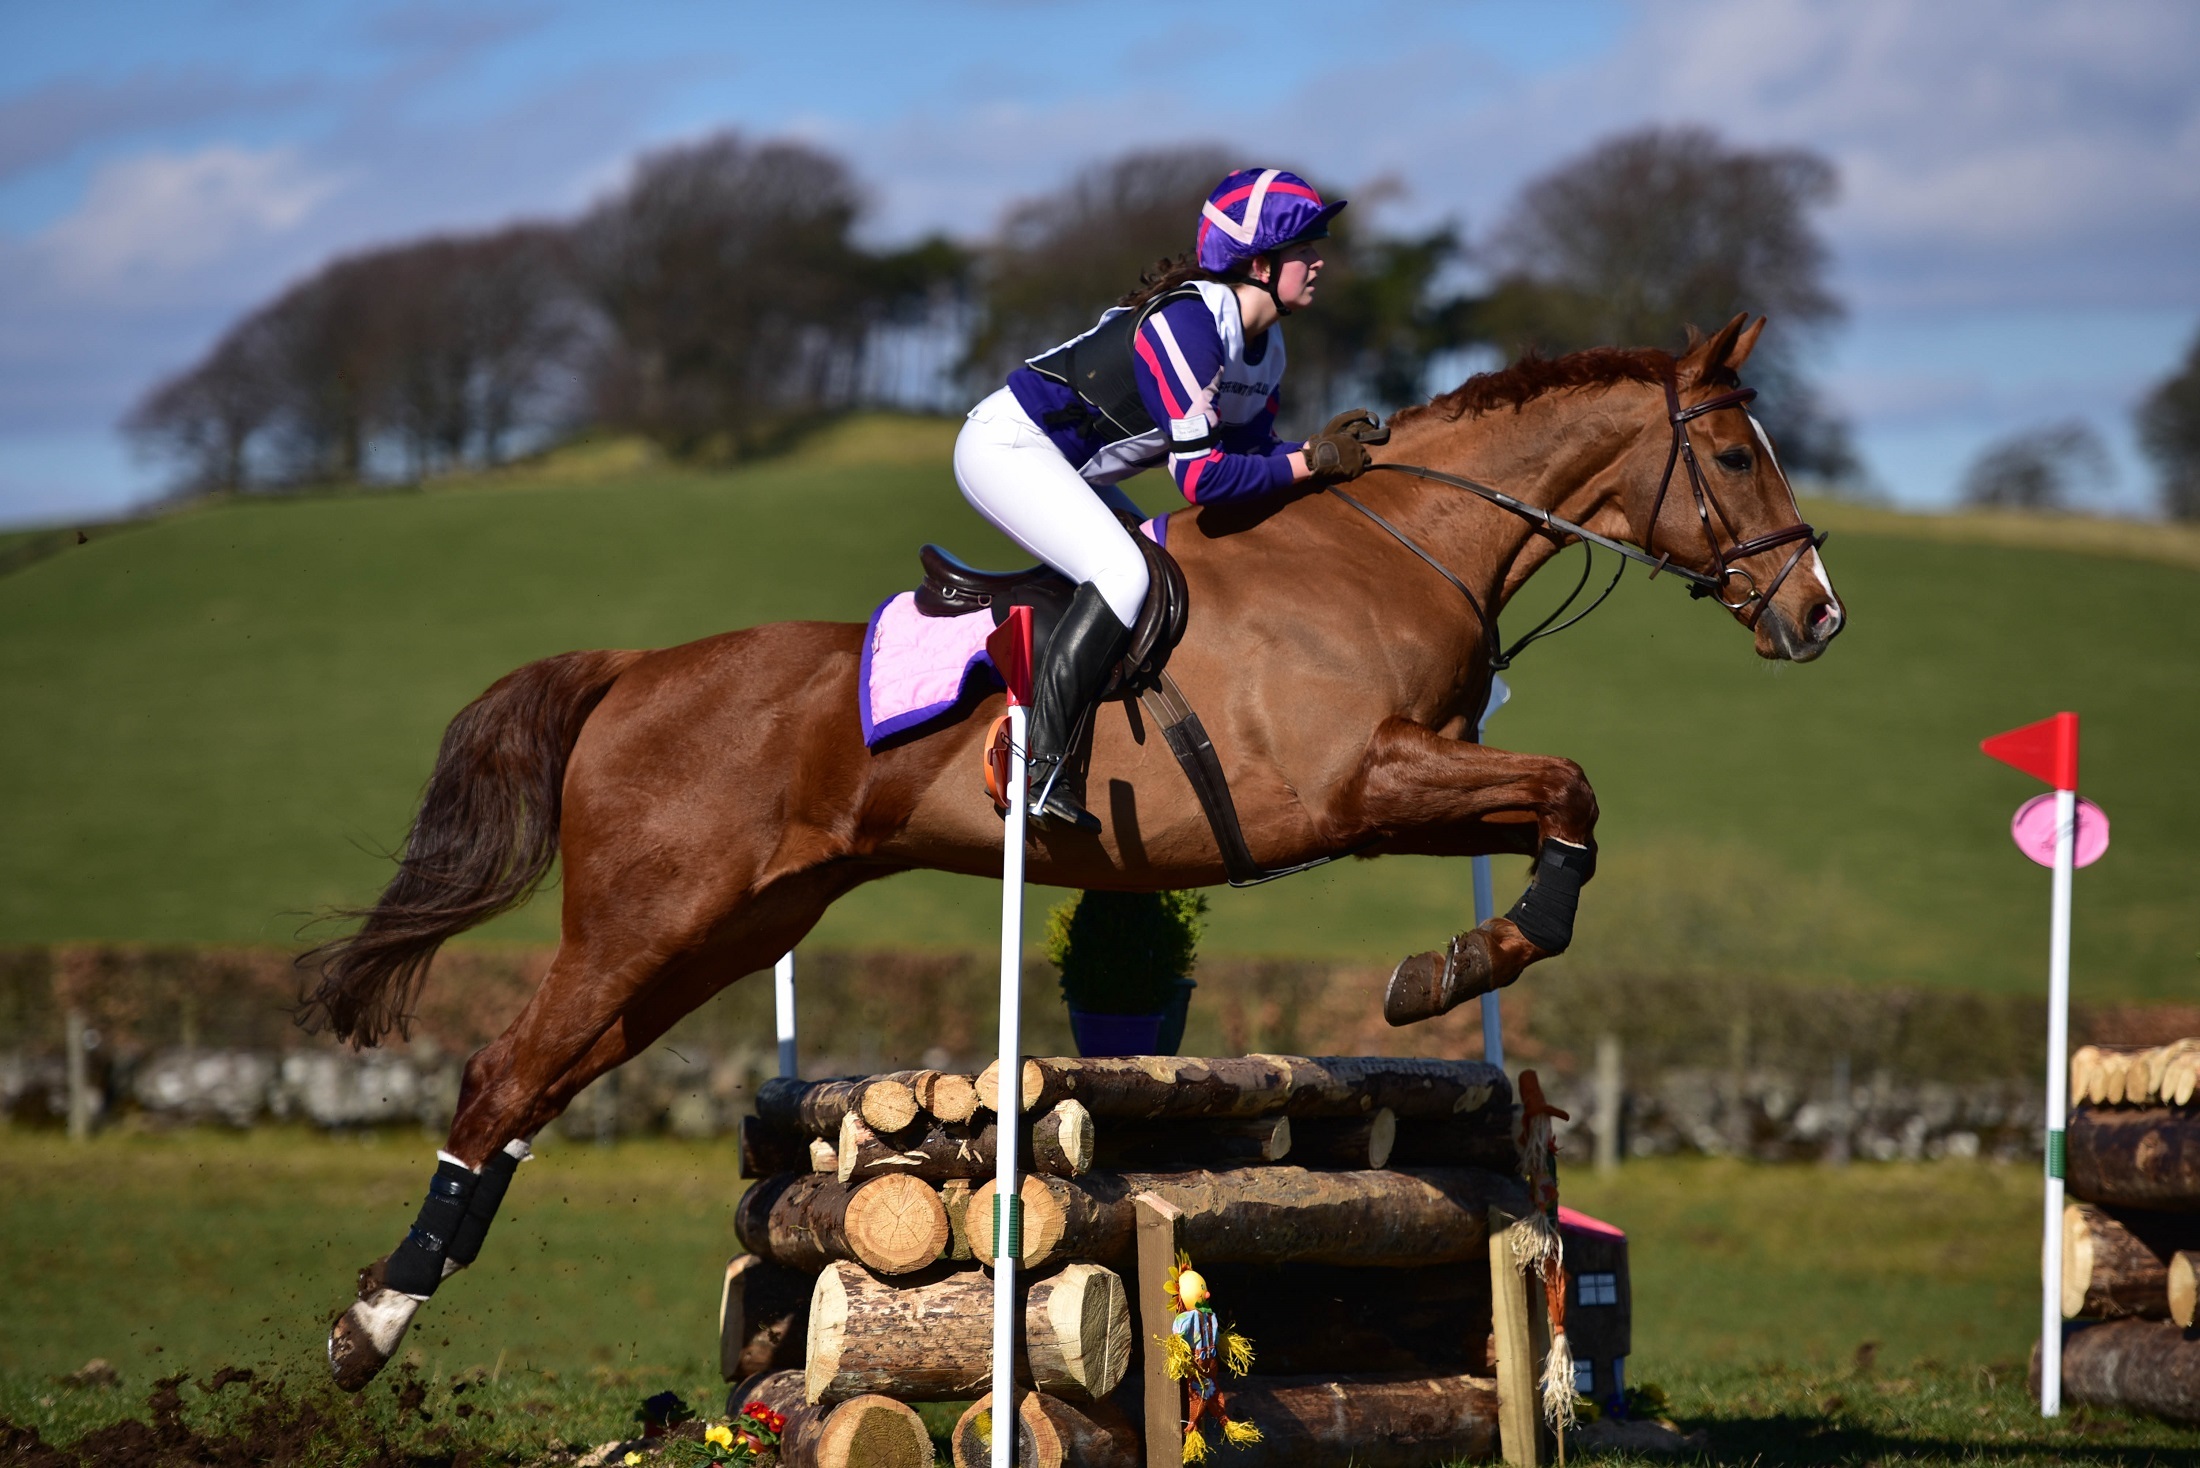 sports, show jumping, equestrian, horse